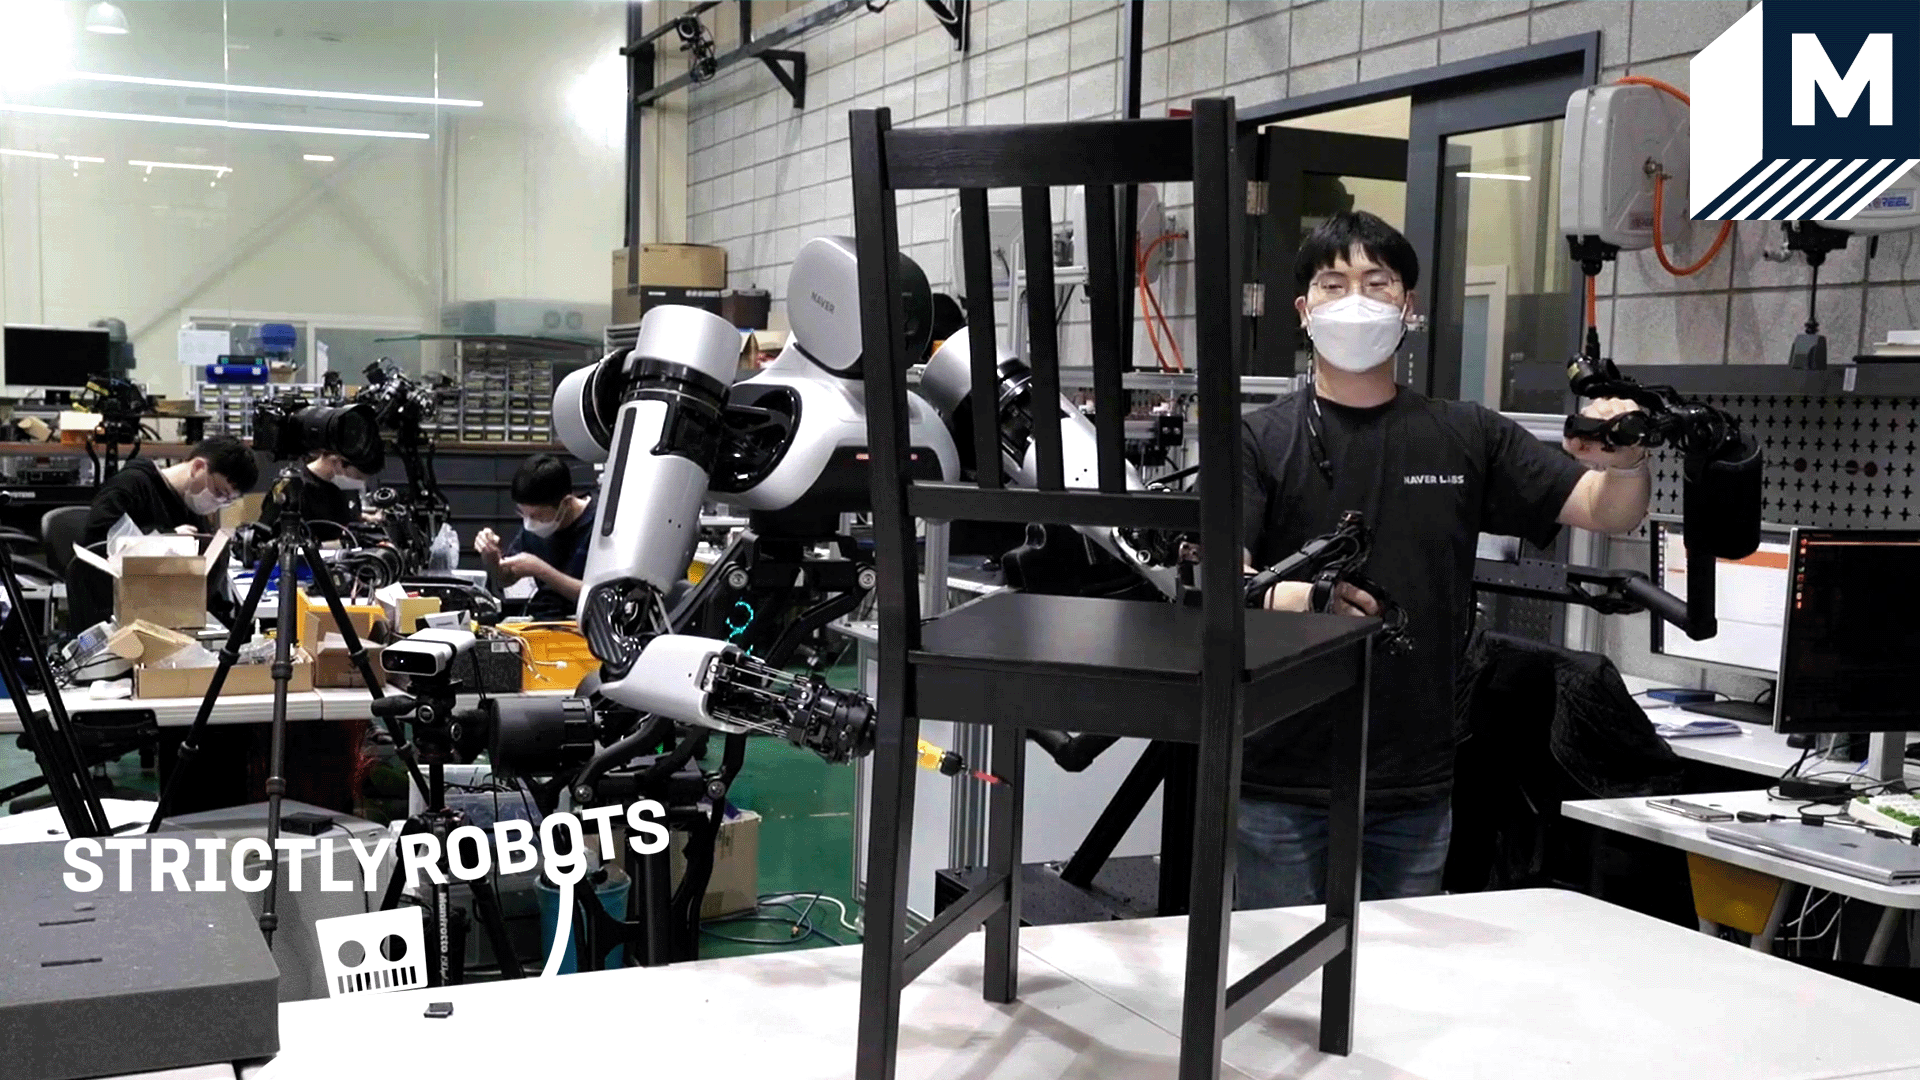 Meet the robot learning to assemble IKEA furniture